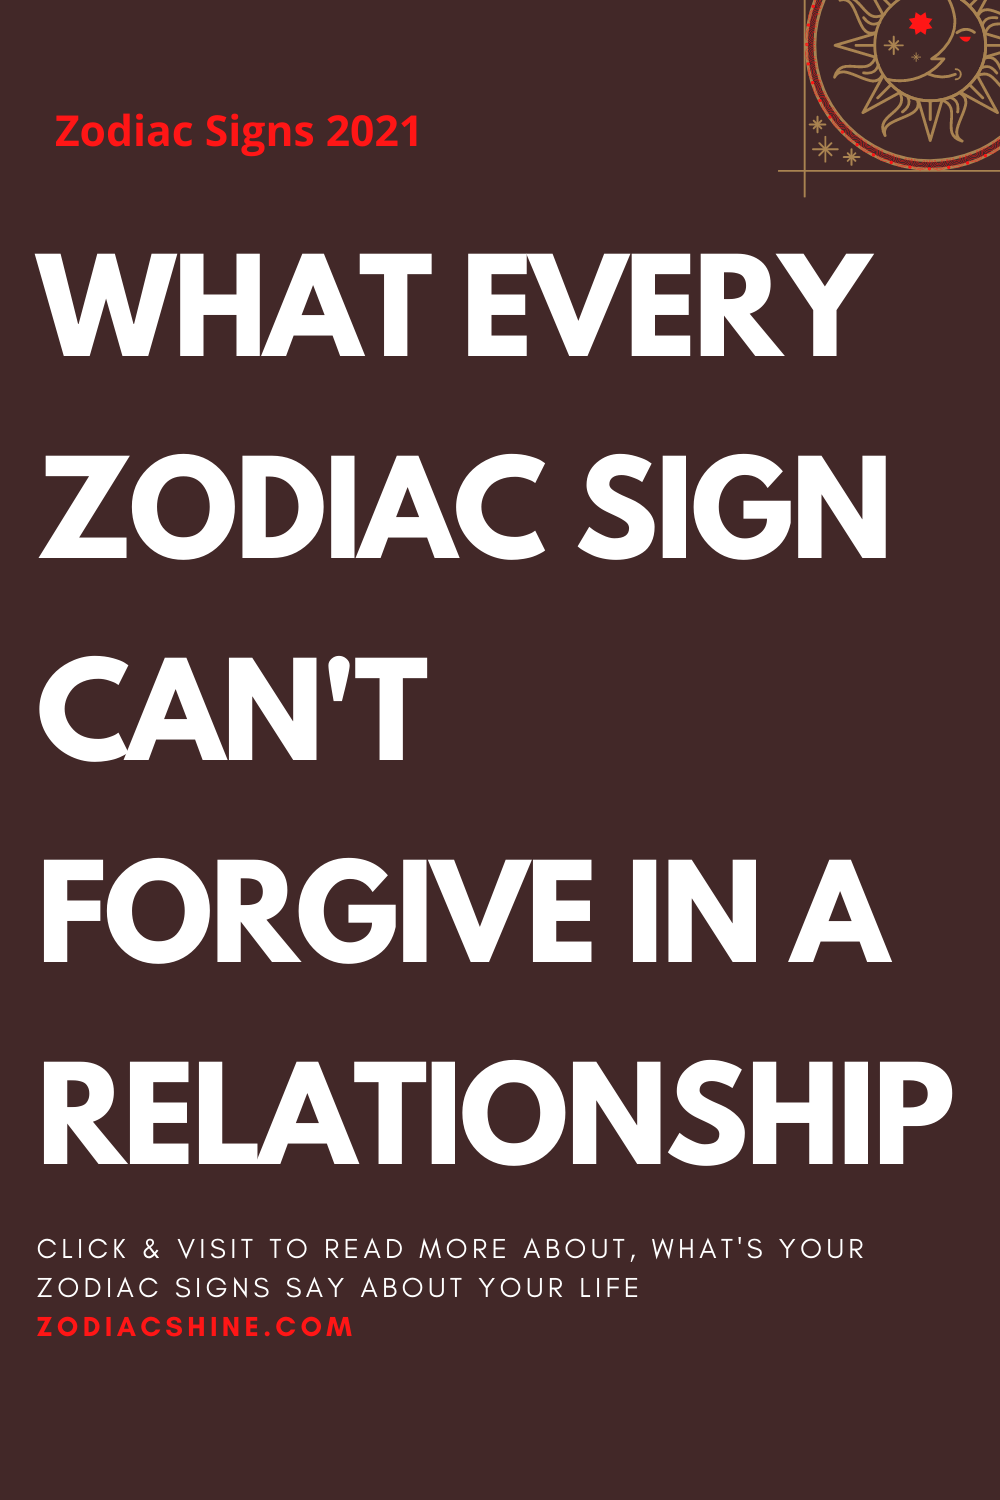 WHAT EVERY ZODIAC SIGN CAN'T FORGIVE IN A RELATIONSHIP